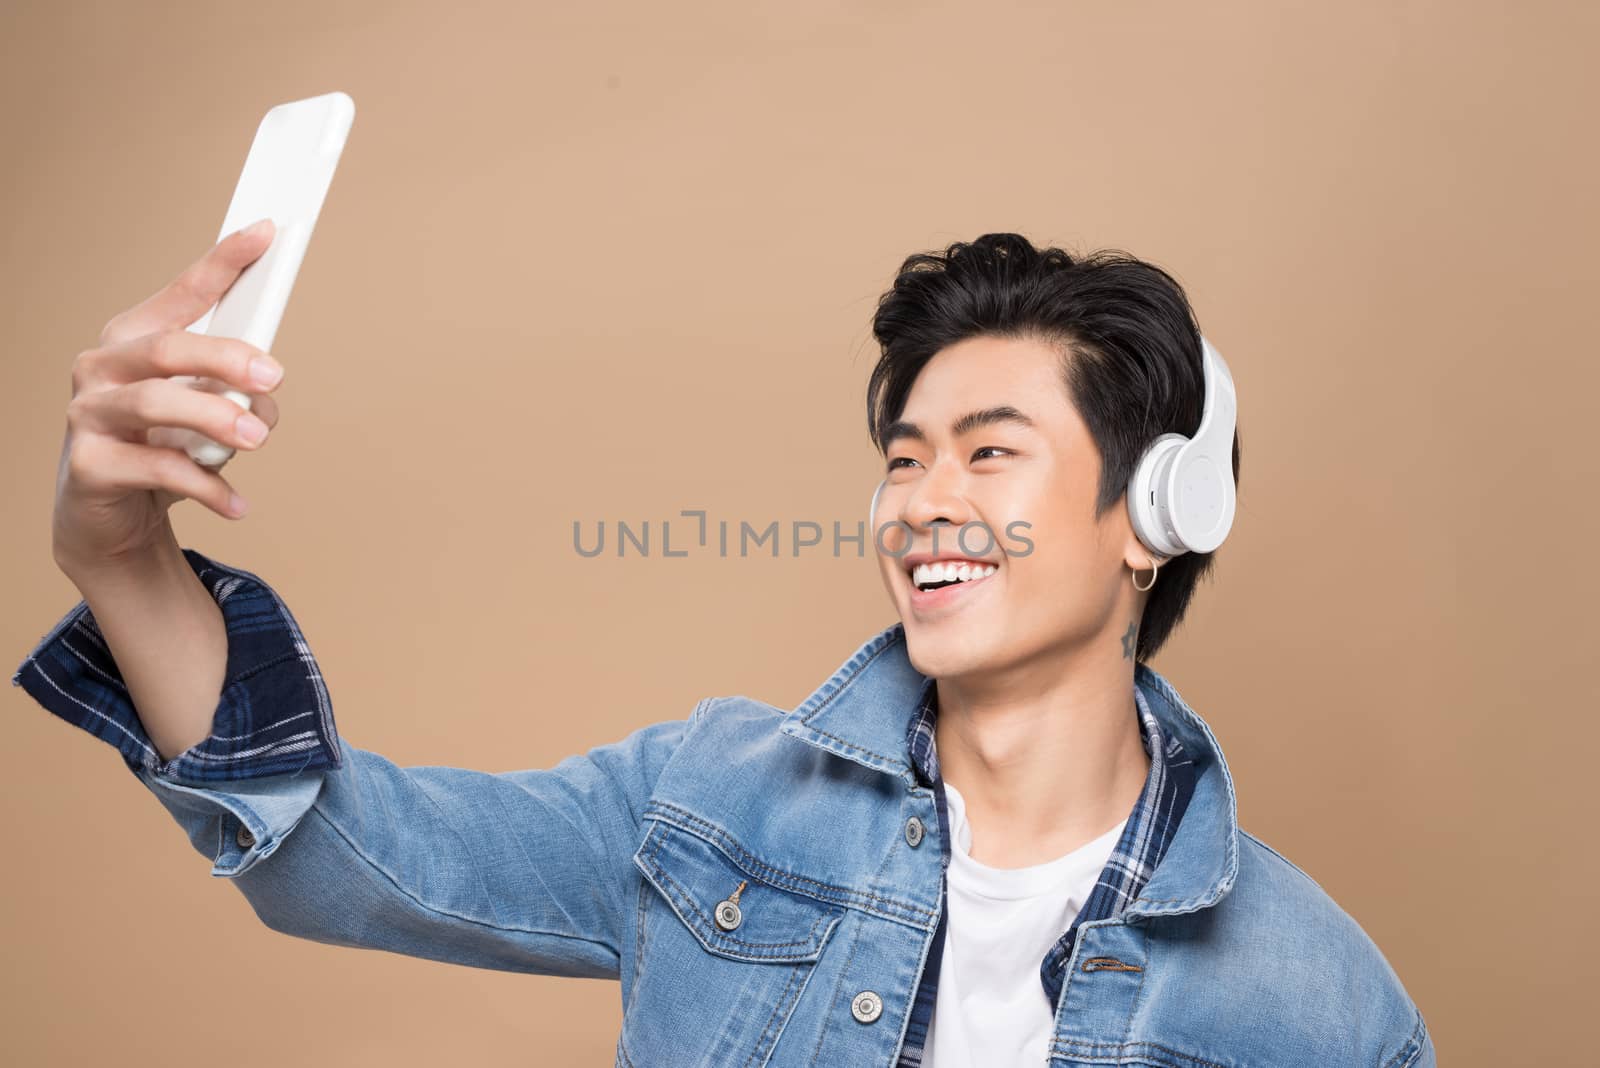 Portrait of a young asian handsome man with headphones smiling and listening to music